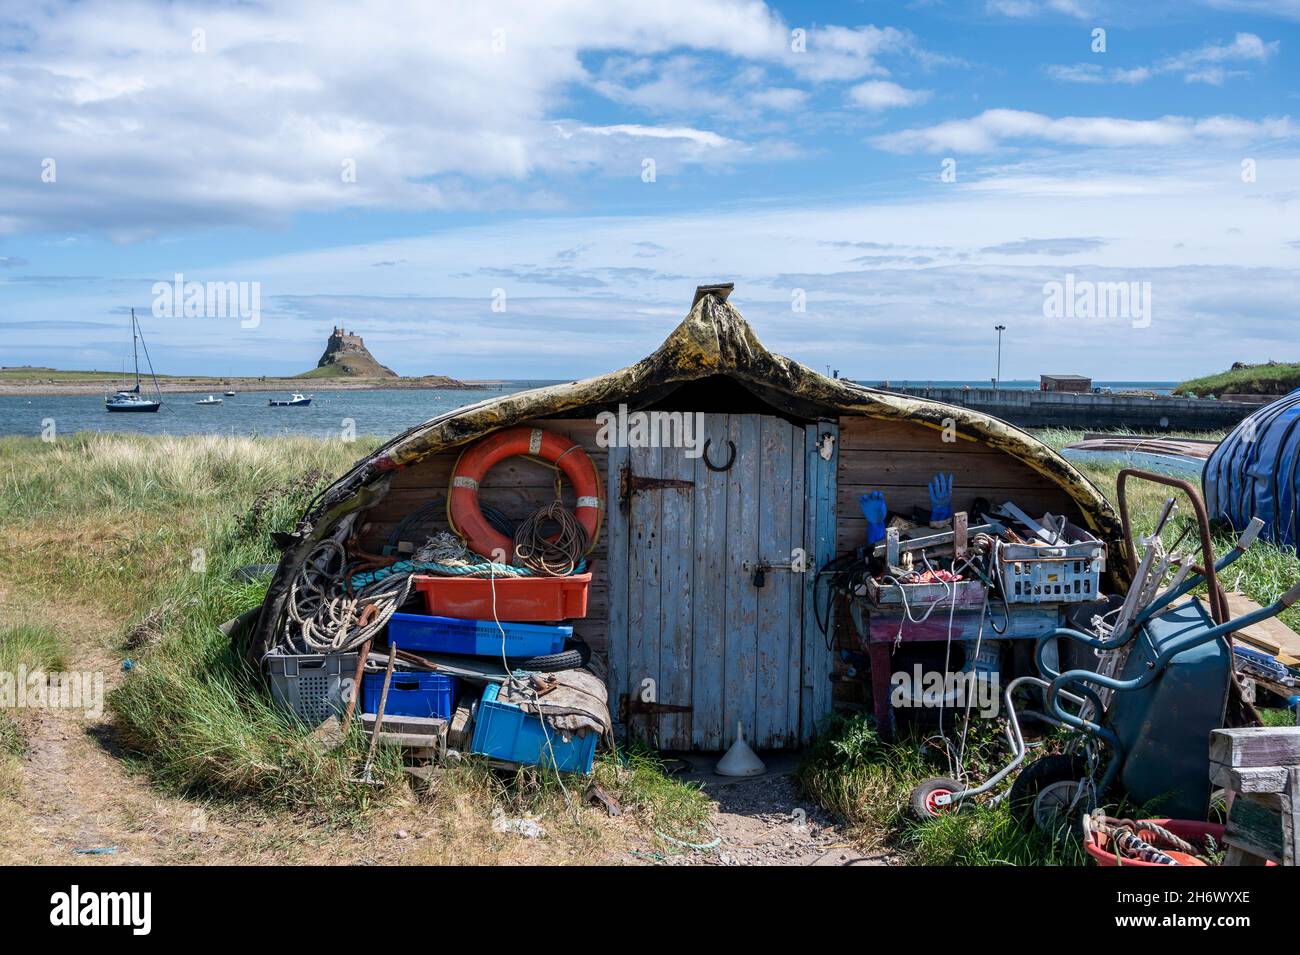 Attractive 'boat sheds' made from repurposed upturned wooden herring boats, Lindisfarne Harbour, Holy Island. Lindisfarne Castle is in the background. Stock Photo